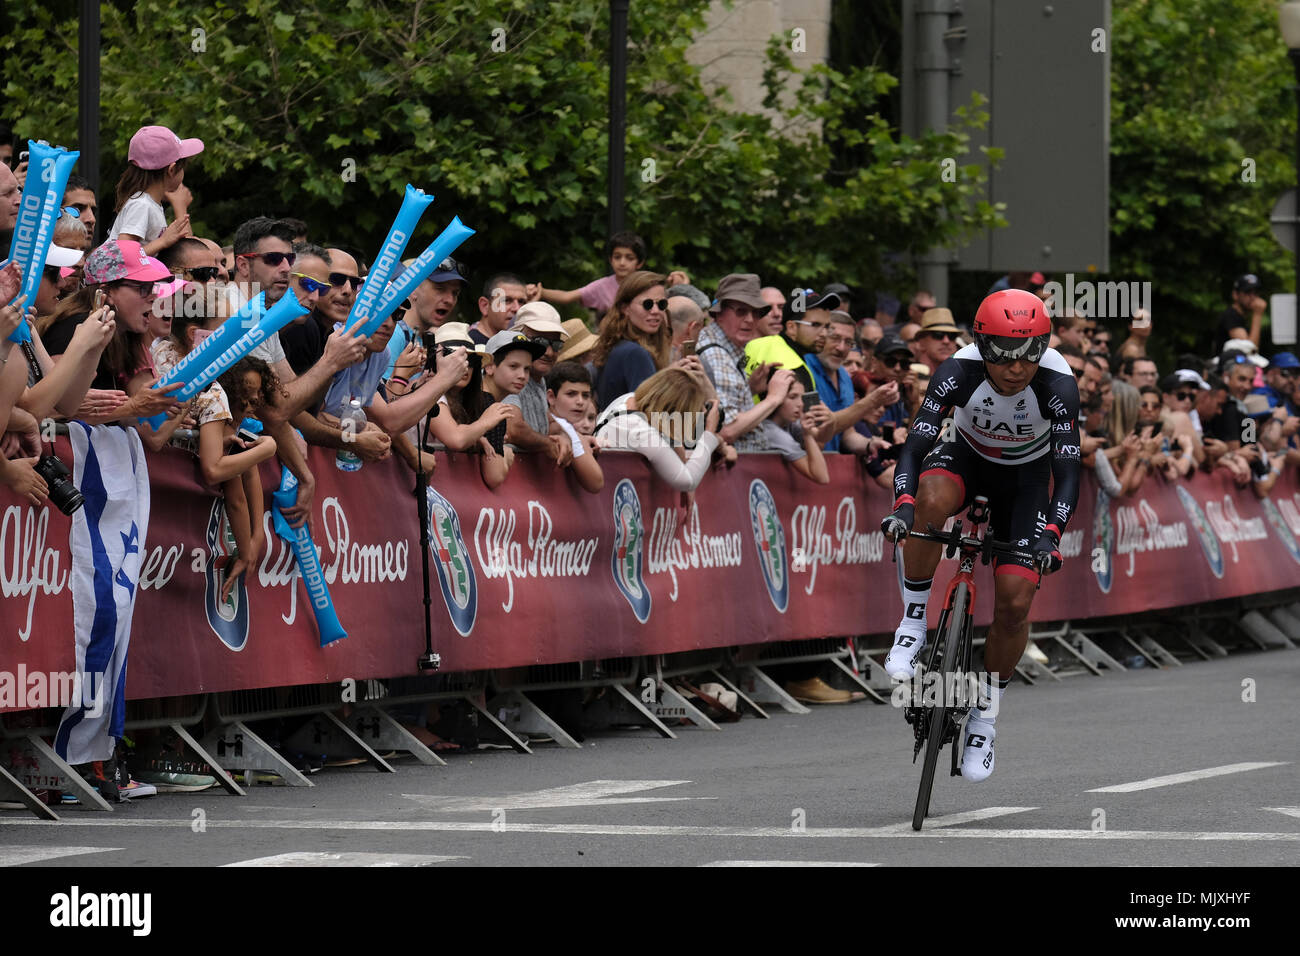 Colombian cyclist John Darwin Atapuma who rides for the UAE Emirates  professional cycling Team sprints as Israeli spectators cheer during the  101st Giro d'Italia, Tour of Italy in the 1st stage which